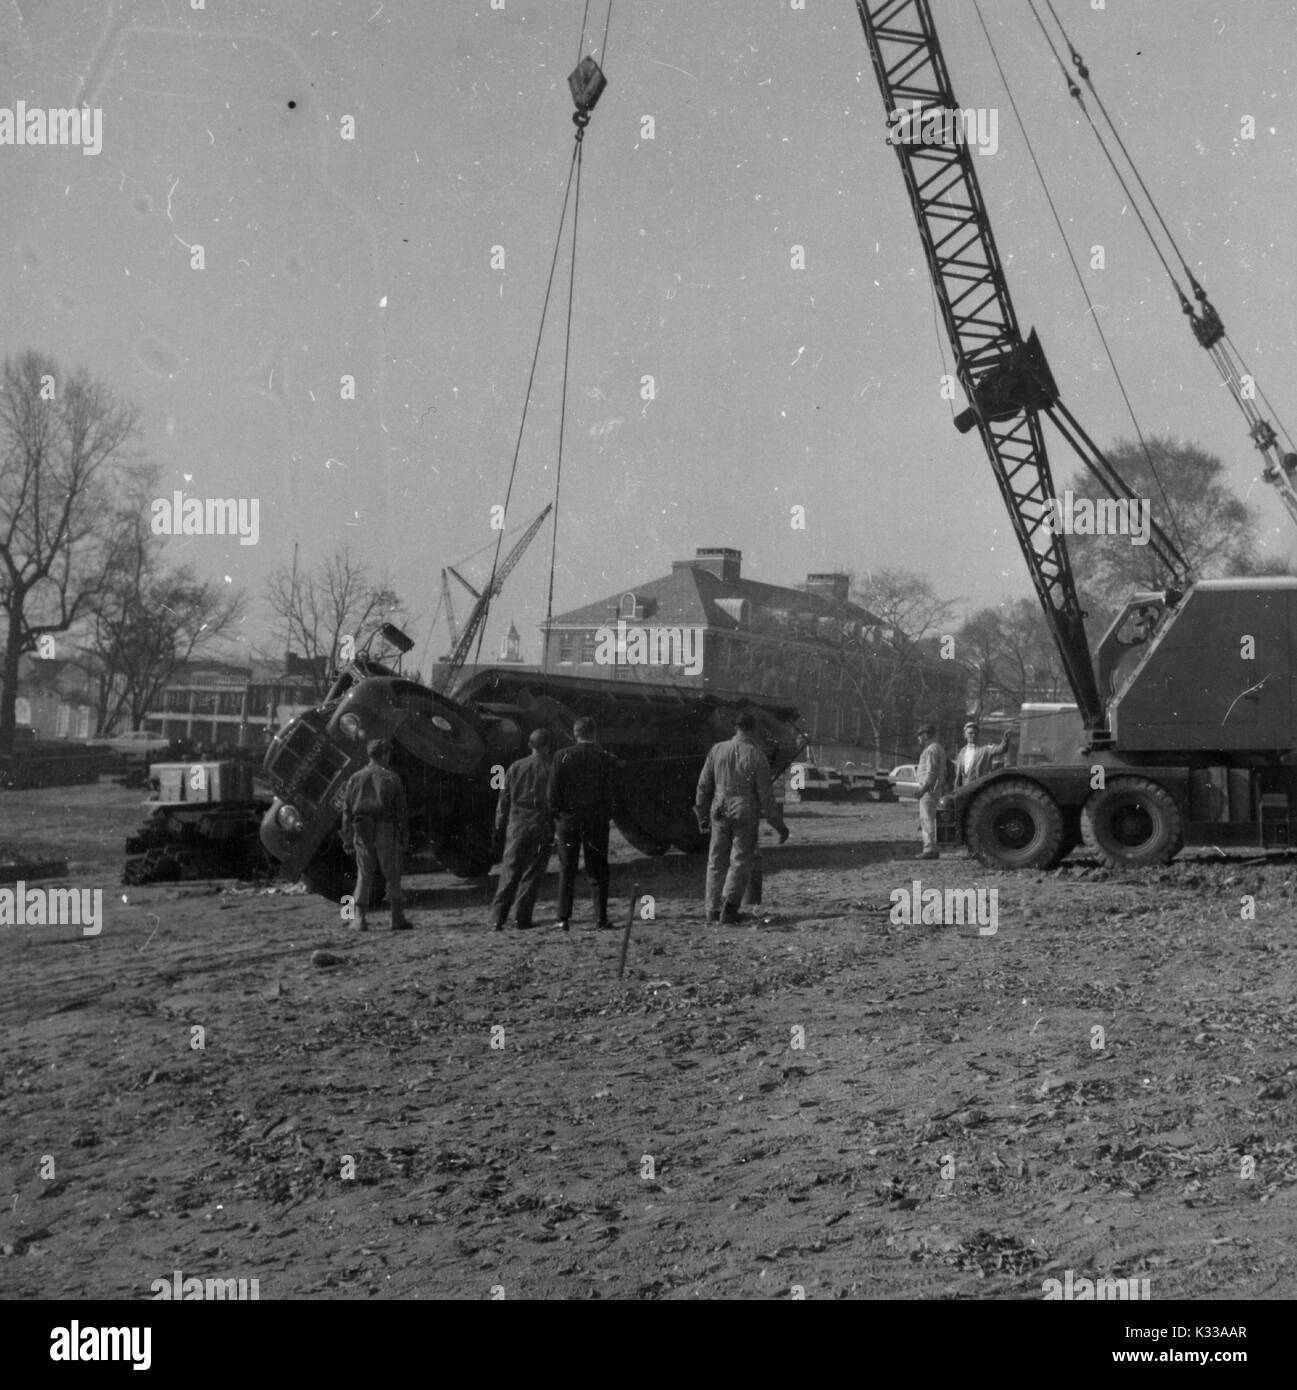 During the early stages of construction of the Milton S Eisenhower Library at Johns Hopkins University, a half dozen workers in uniform use a large crane to attempt to correct an overturned truck to its upright position, on the muddy grounds in front of Remsen Hall, a chemistry building on campus, Baltimore, Maryland, 1963. Stock Photo